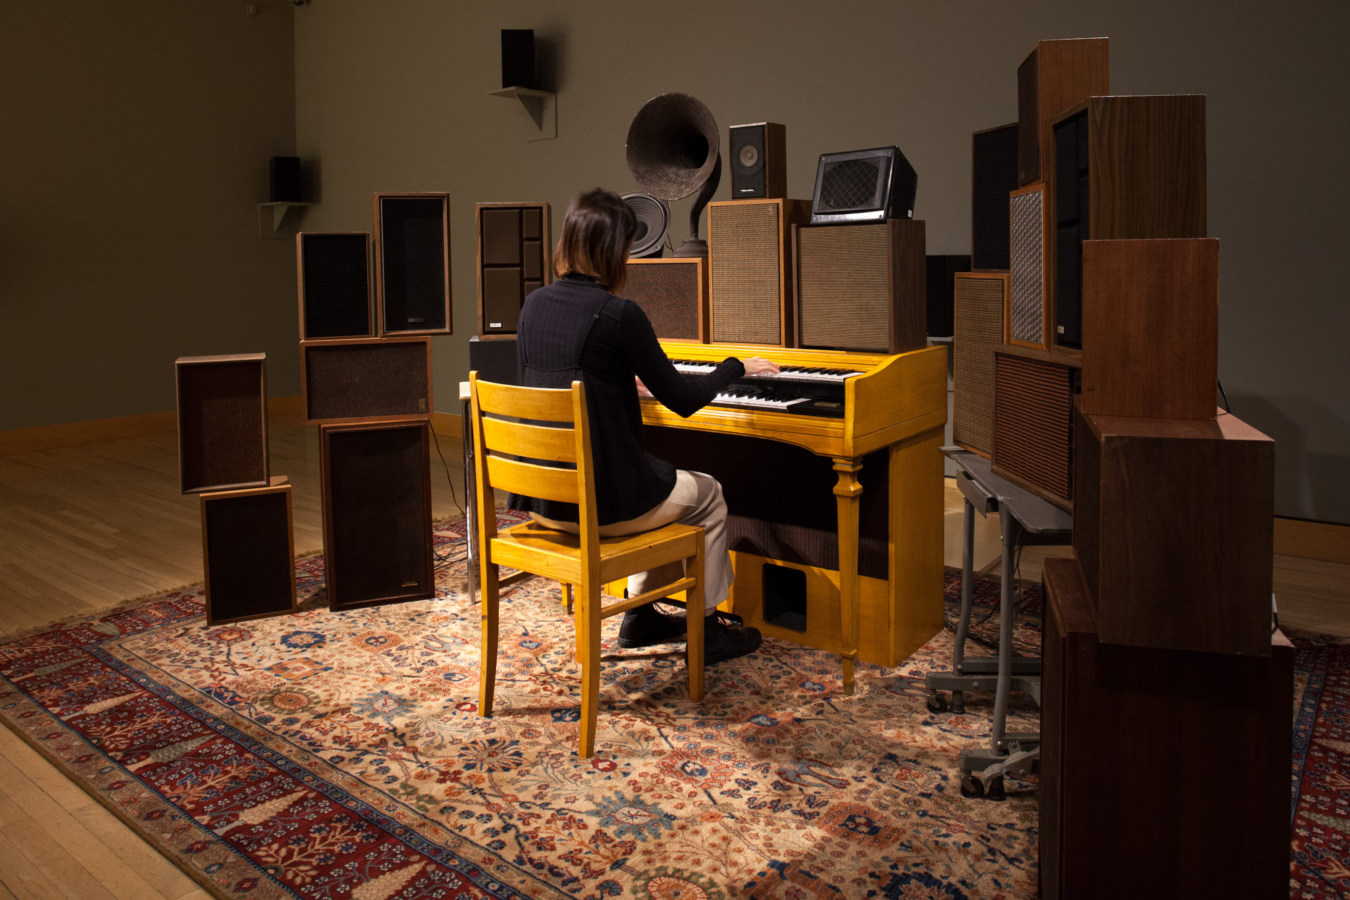 Color image of a person playing an organ surrounded by speakers of various sizes and vintages on an ornate carpet